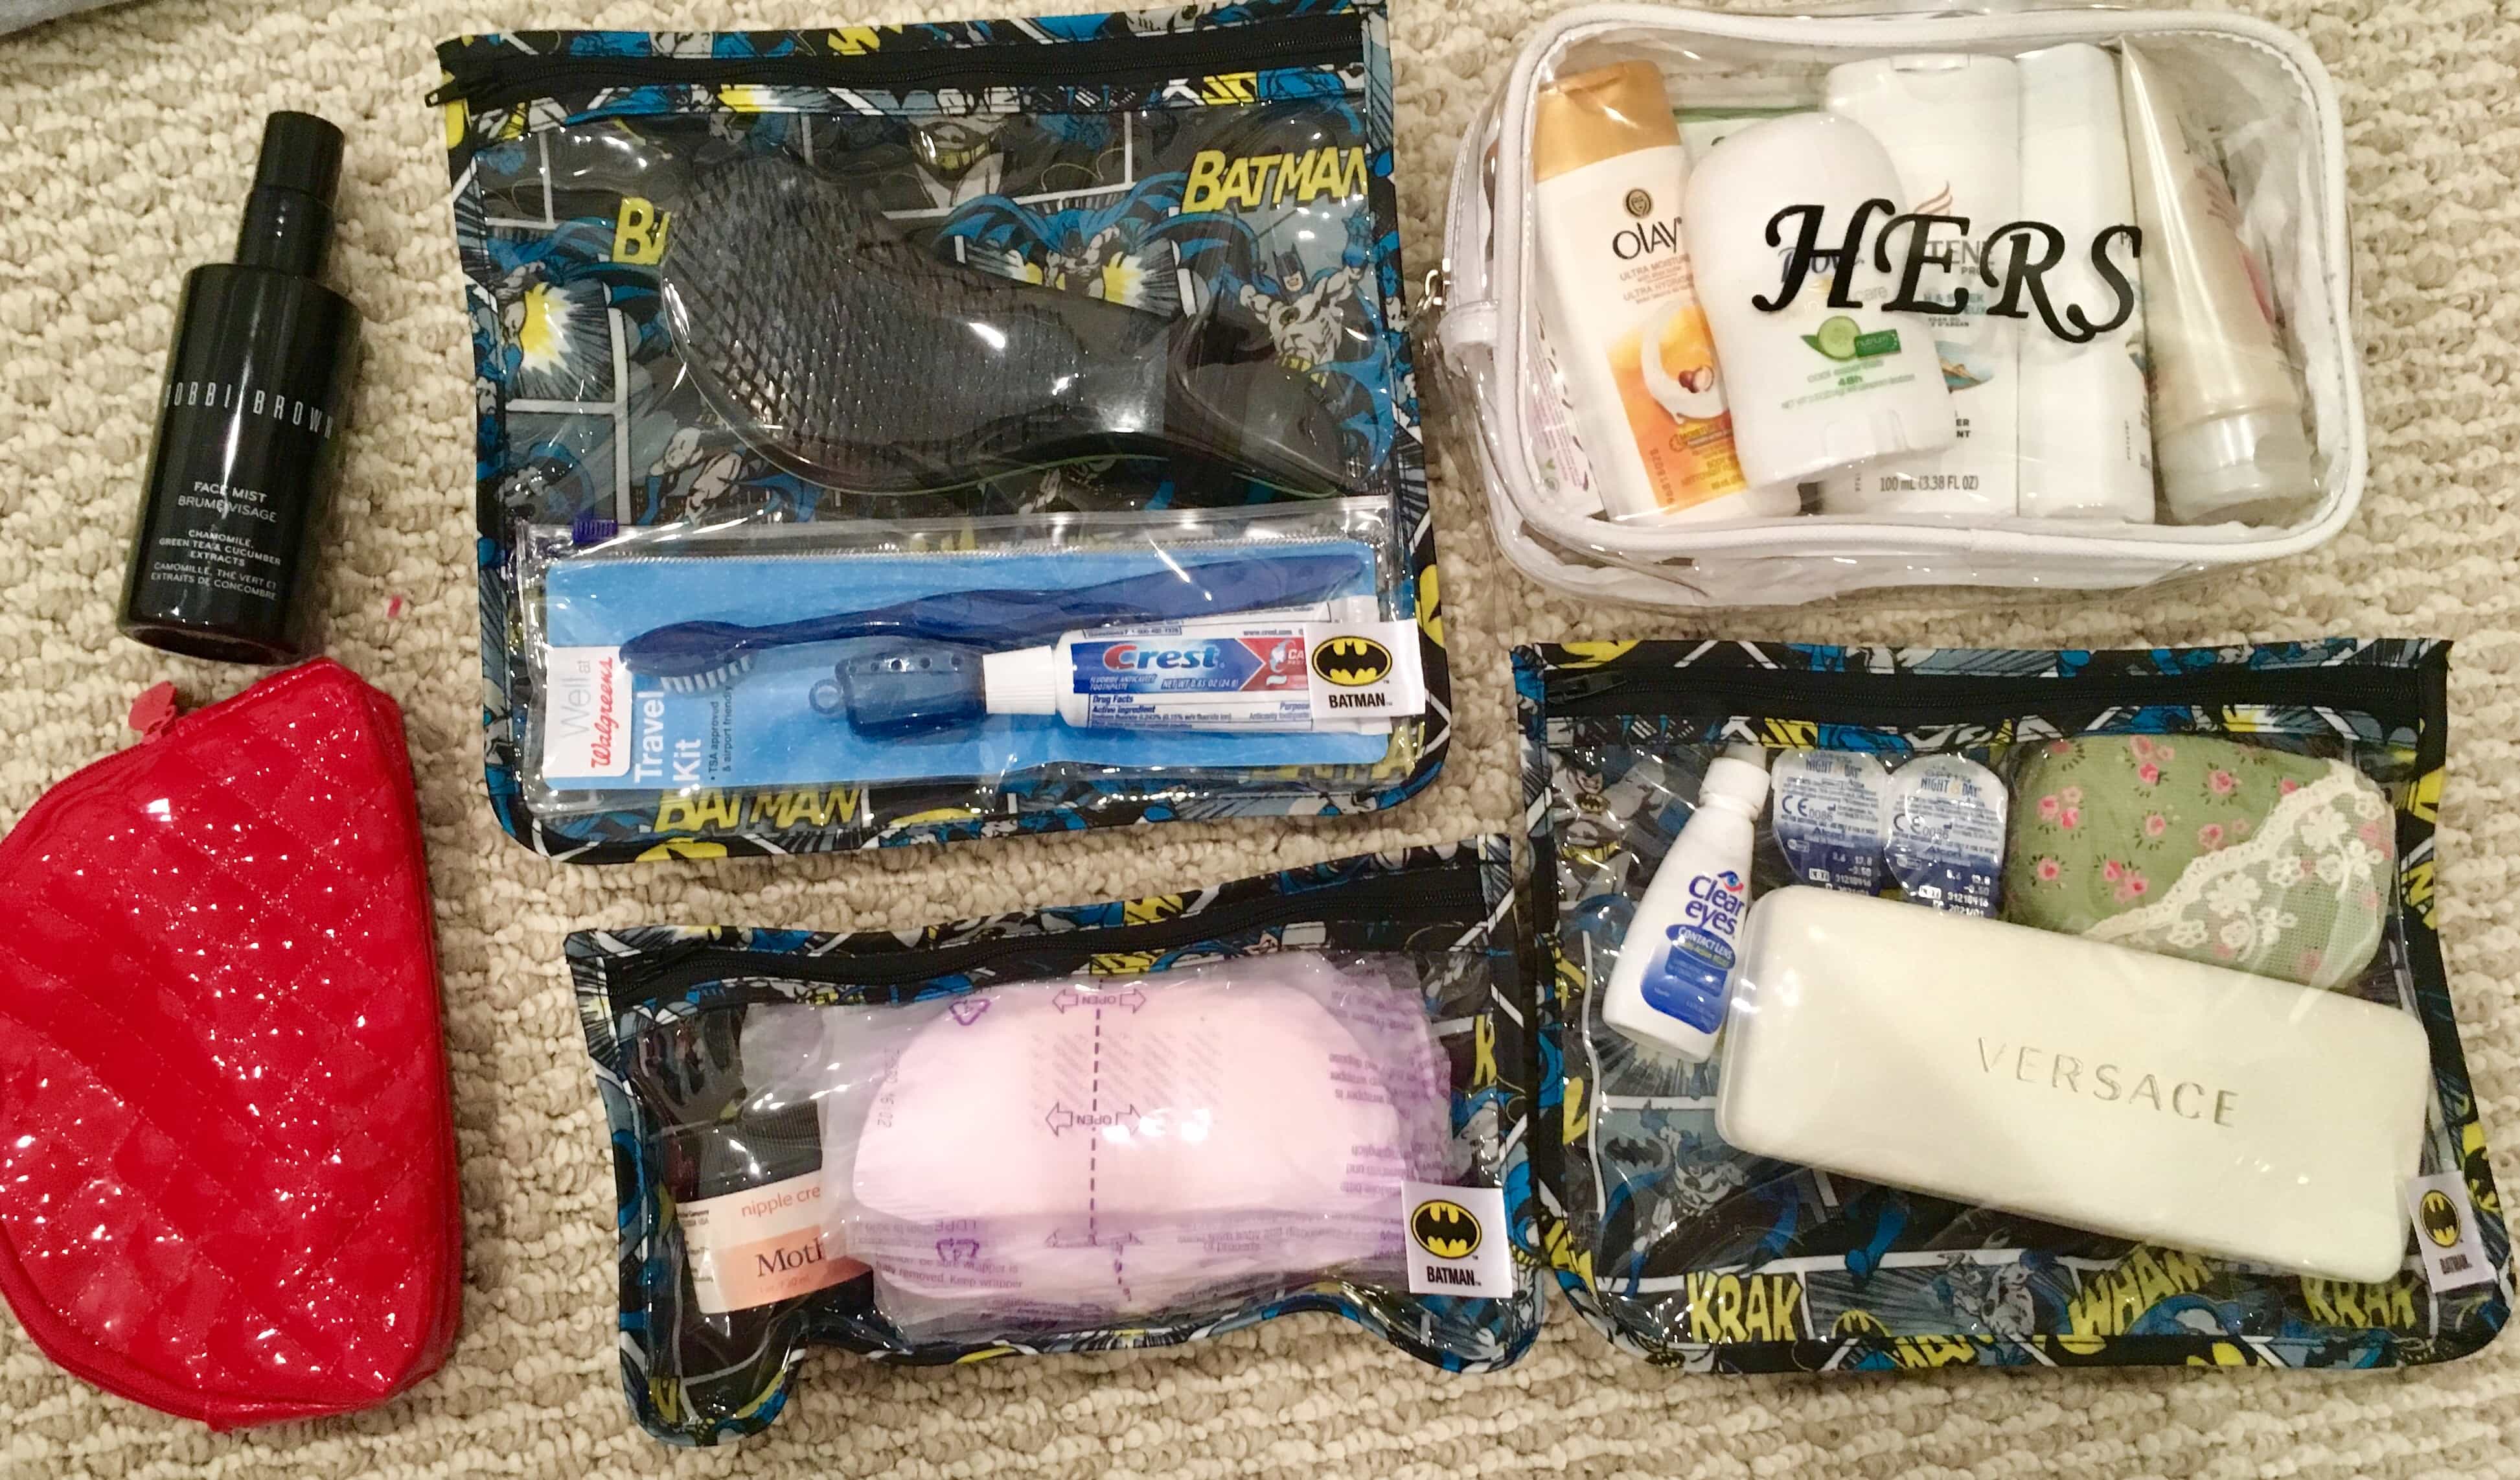 What You Need In Your Hospital Bag for C Section by a Been There Done That  Mom